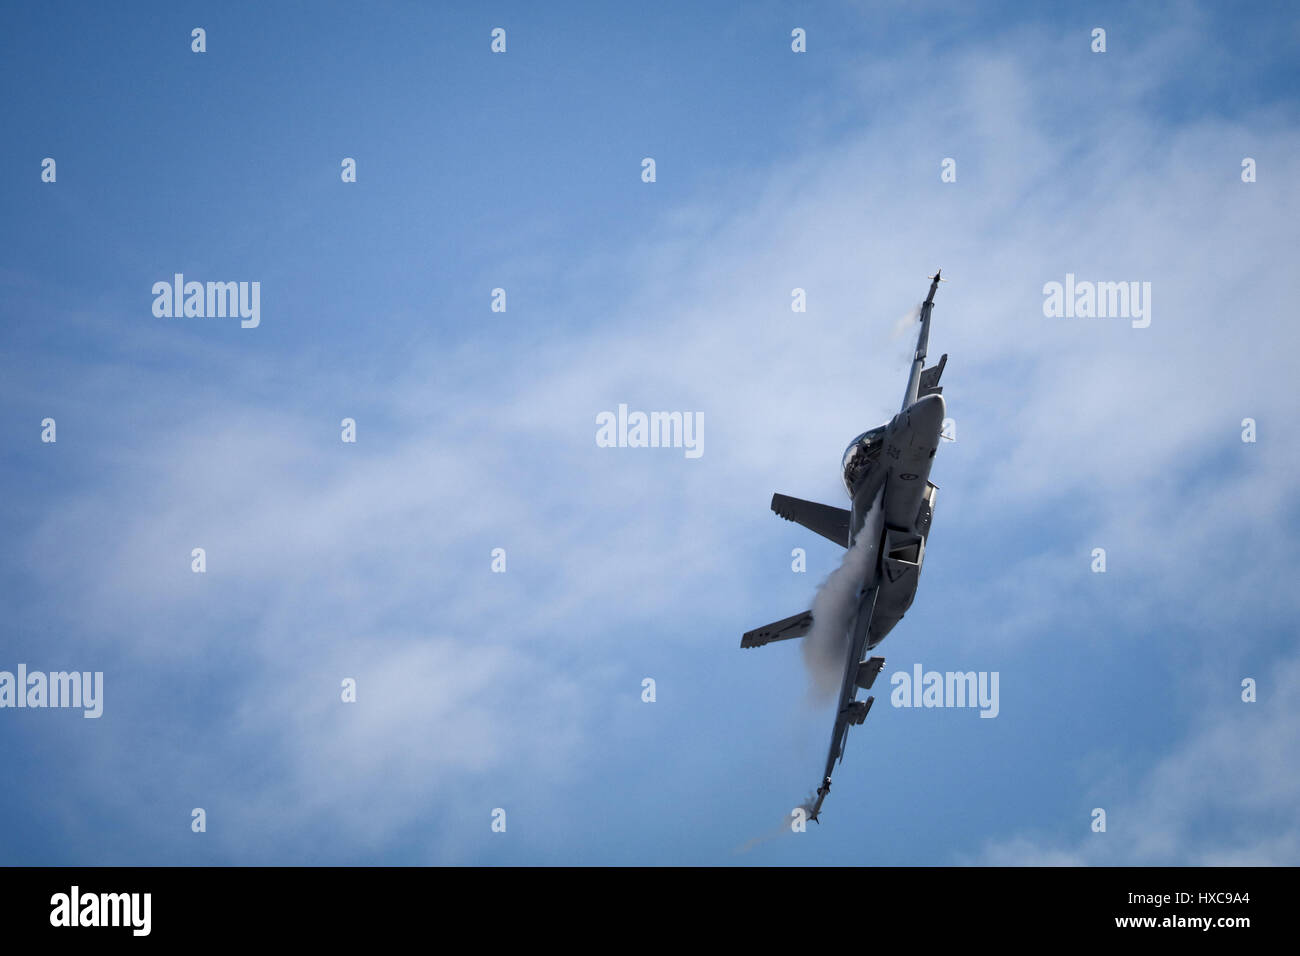 MELBOURNE, AUSTRALIA - MARCH 26: An Royal Australian Air Force FA18F Super Hornet performs in a public display above Melbourne on March 26, 2017 Stock Photo